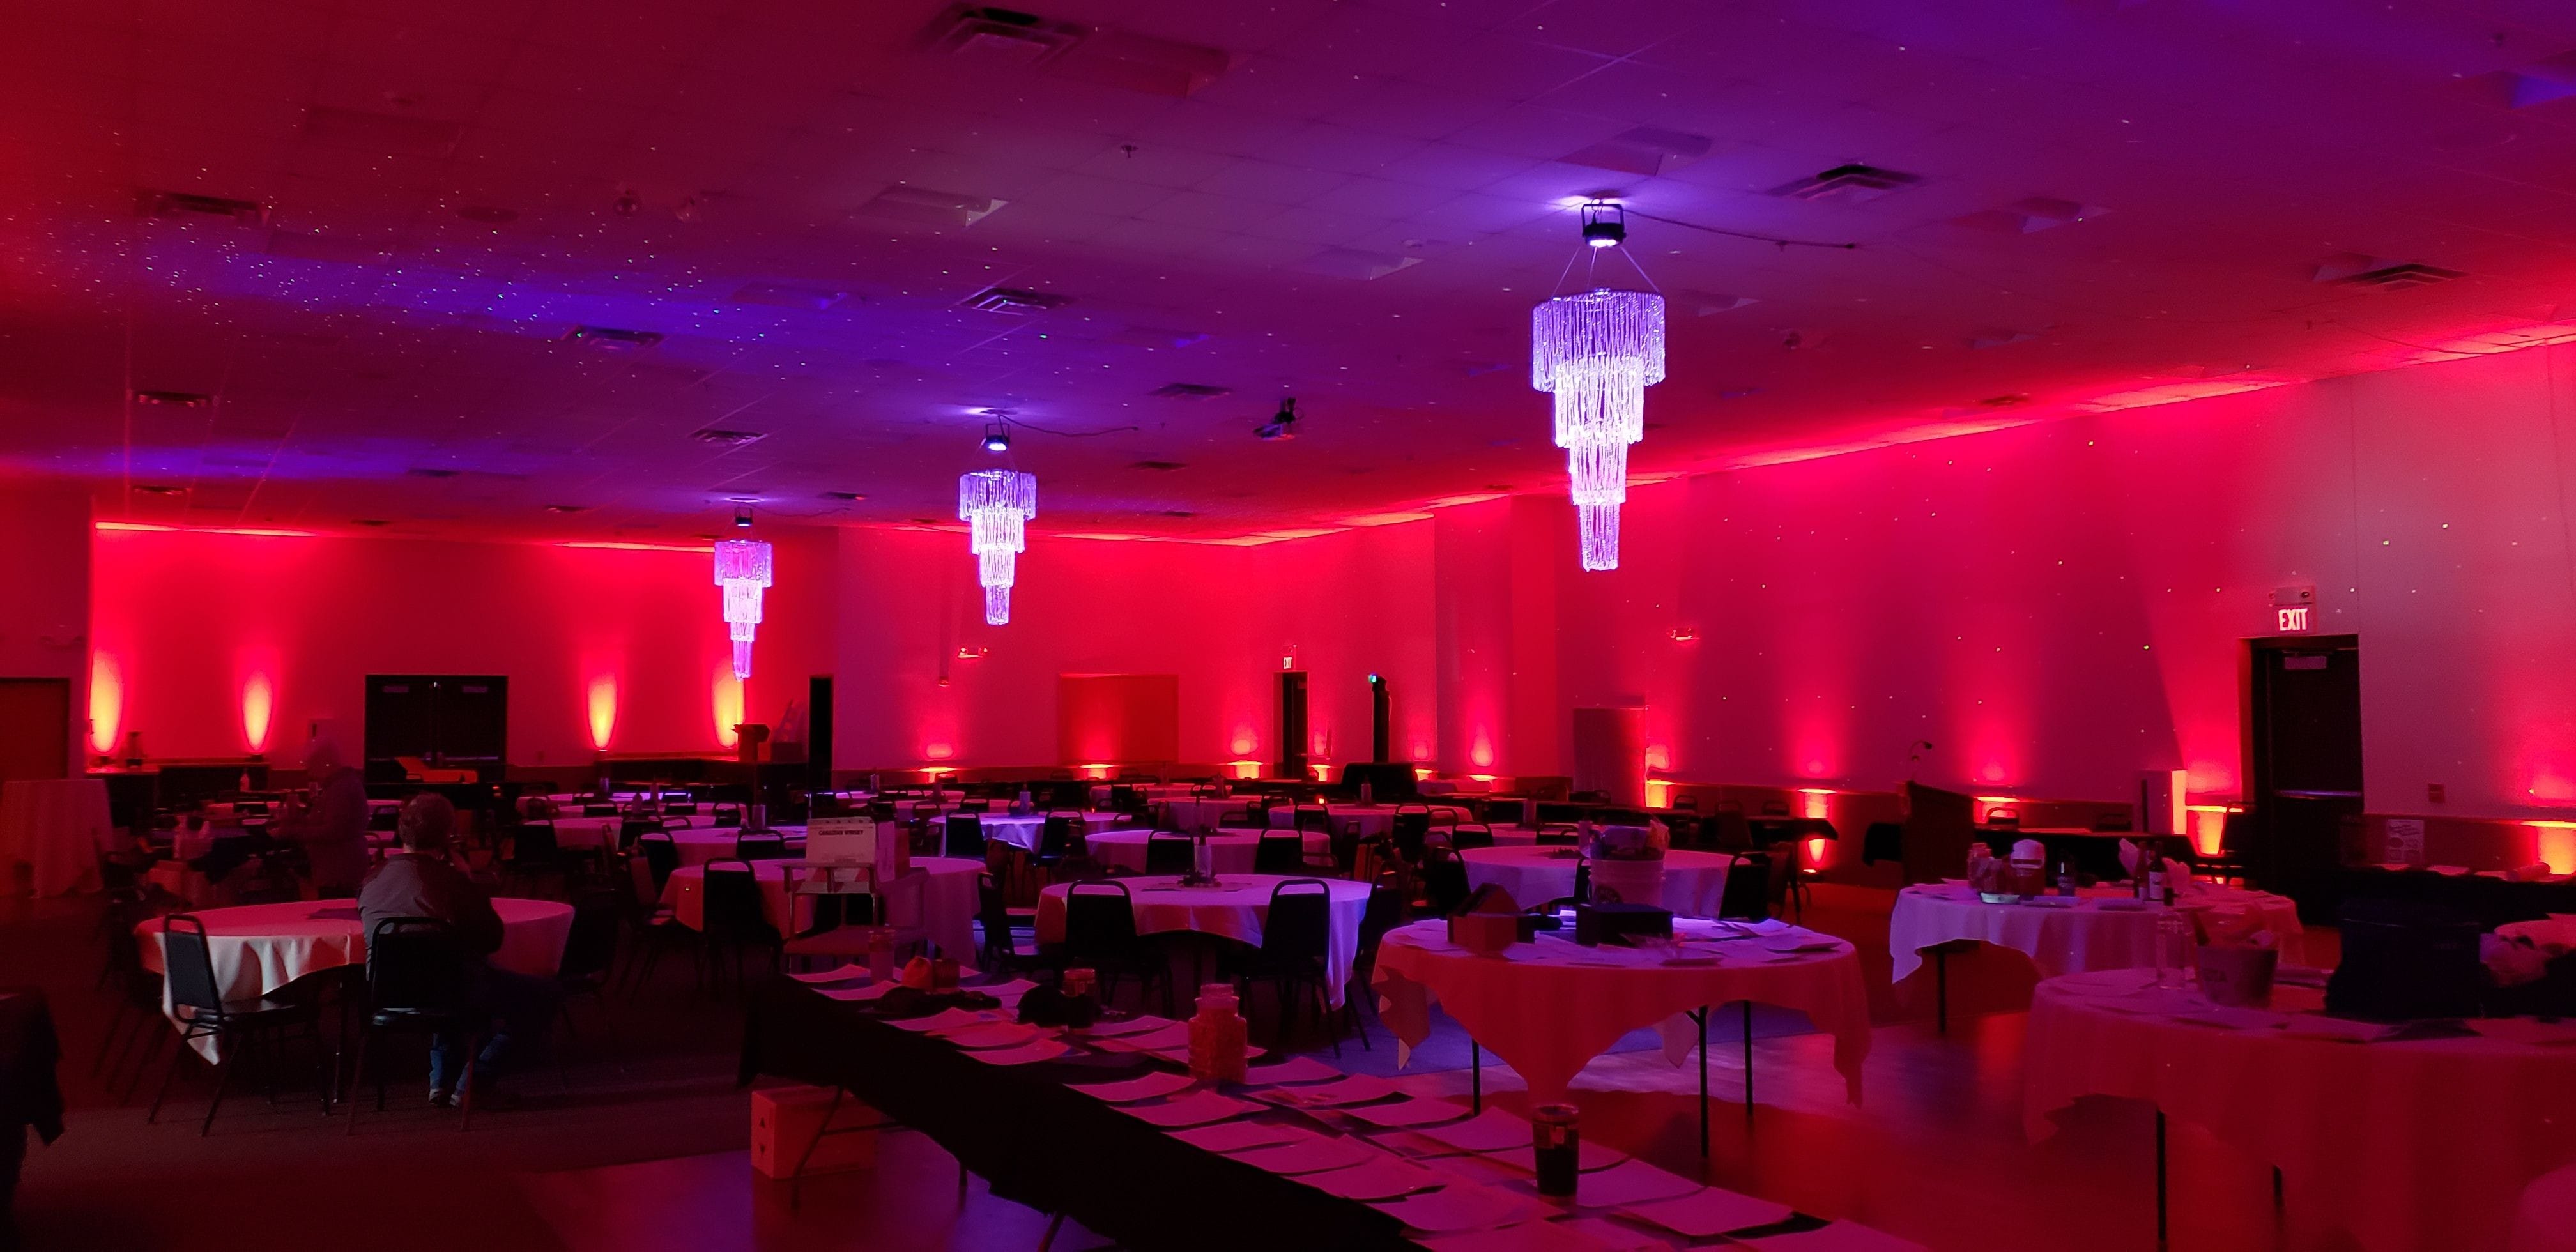 Wedding lighting at the AAD Shrine by Duluth Event lighting with 3 chandeliers and red up lighting